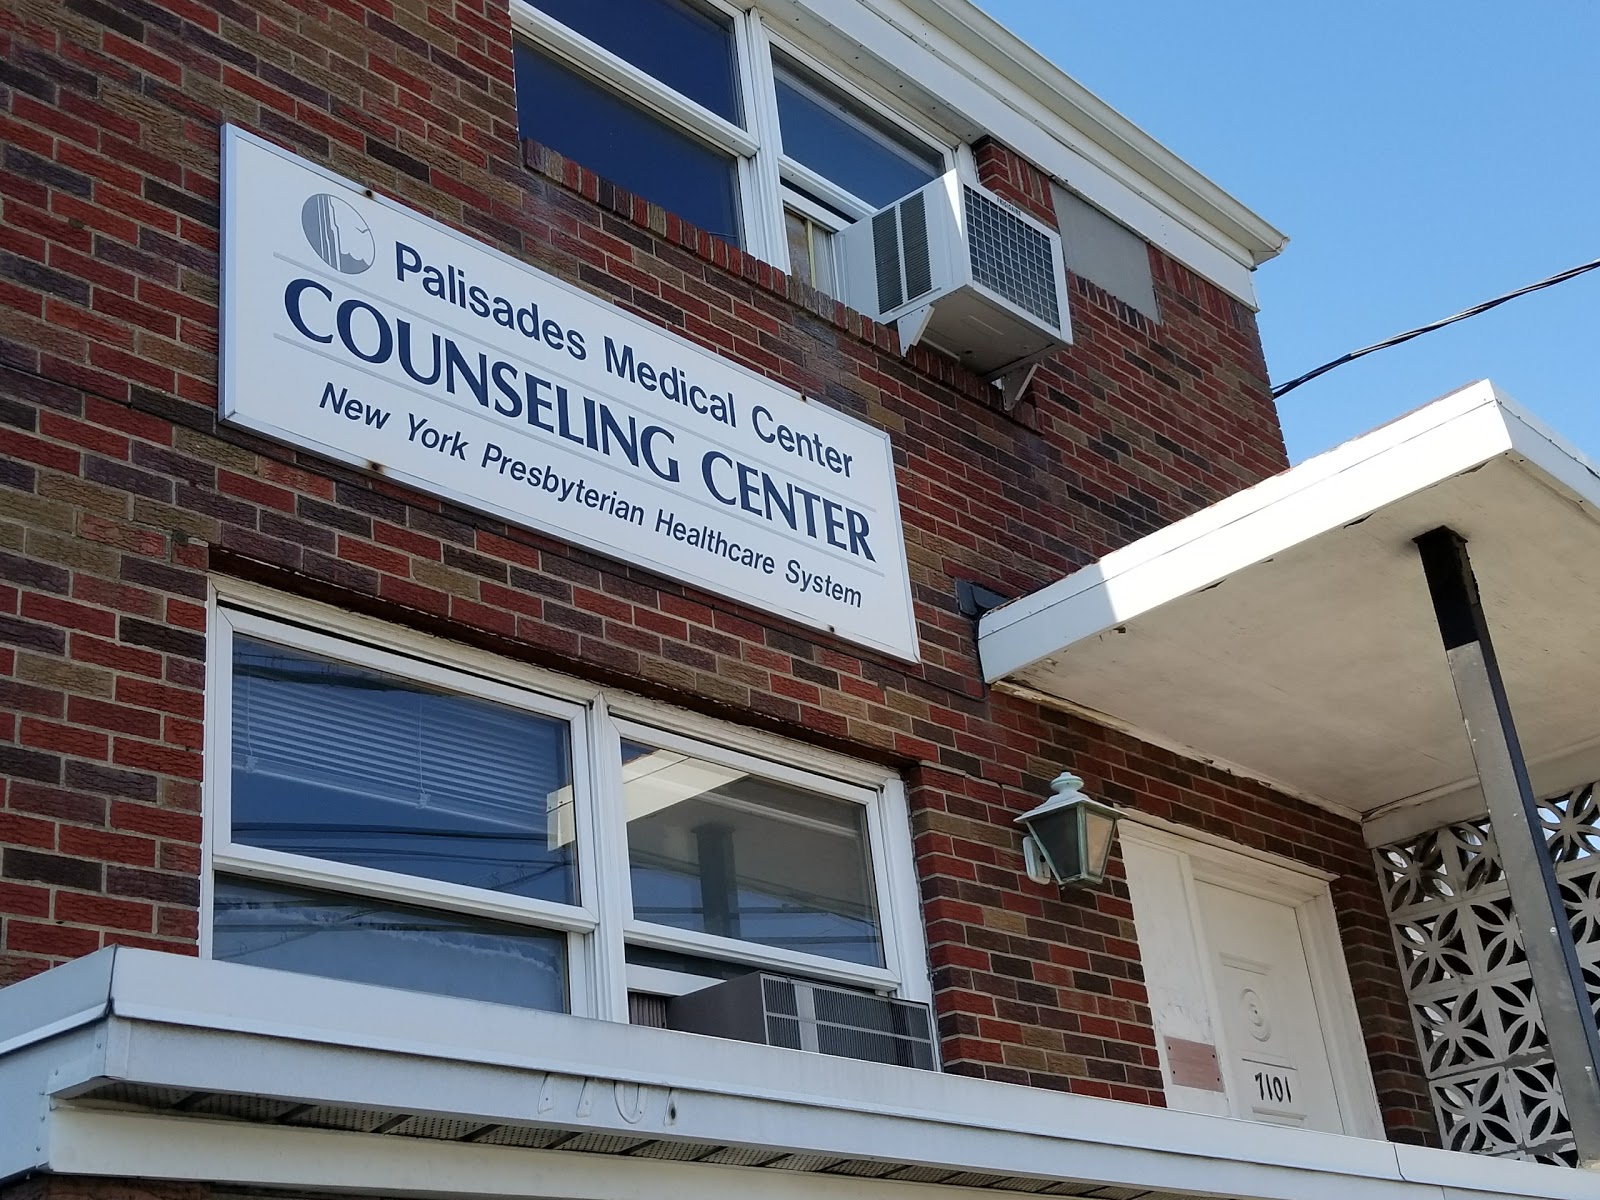 Palisades Medical Center - Counseling